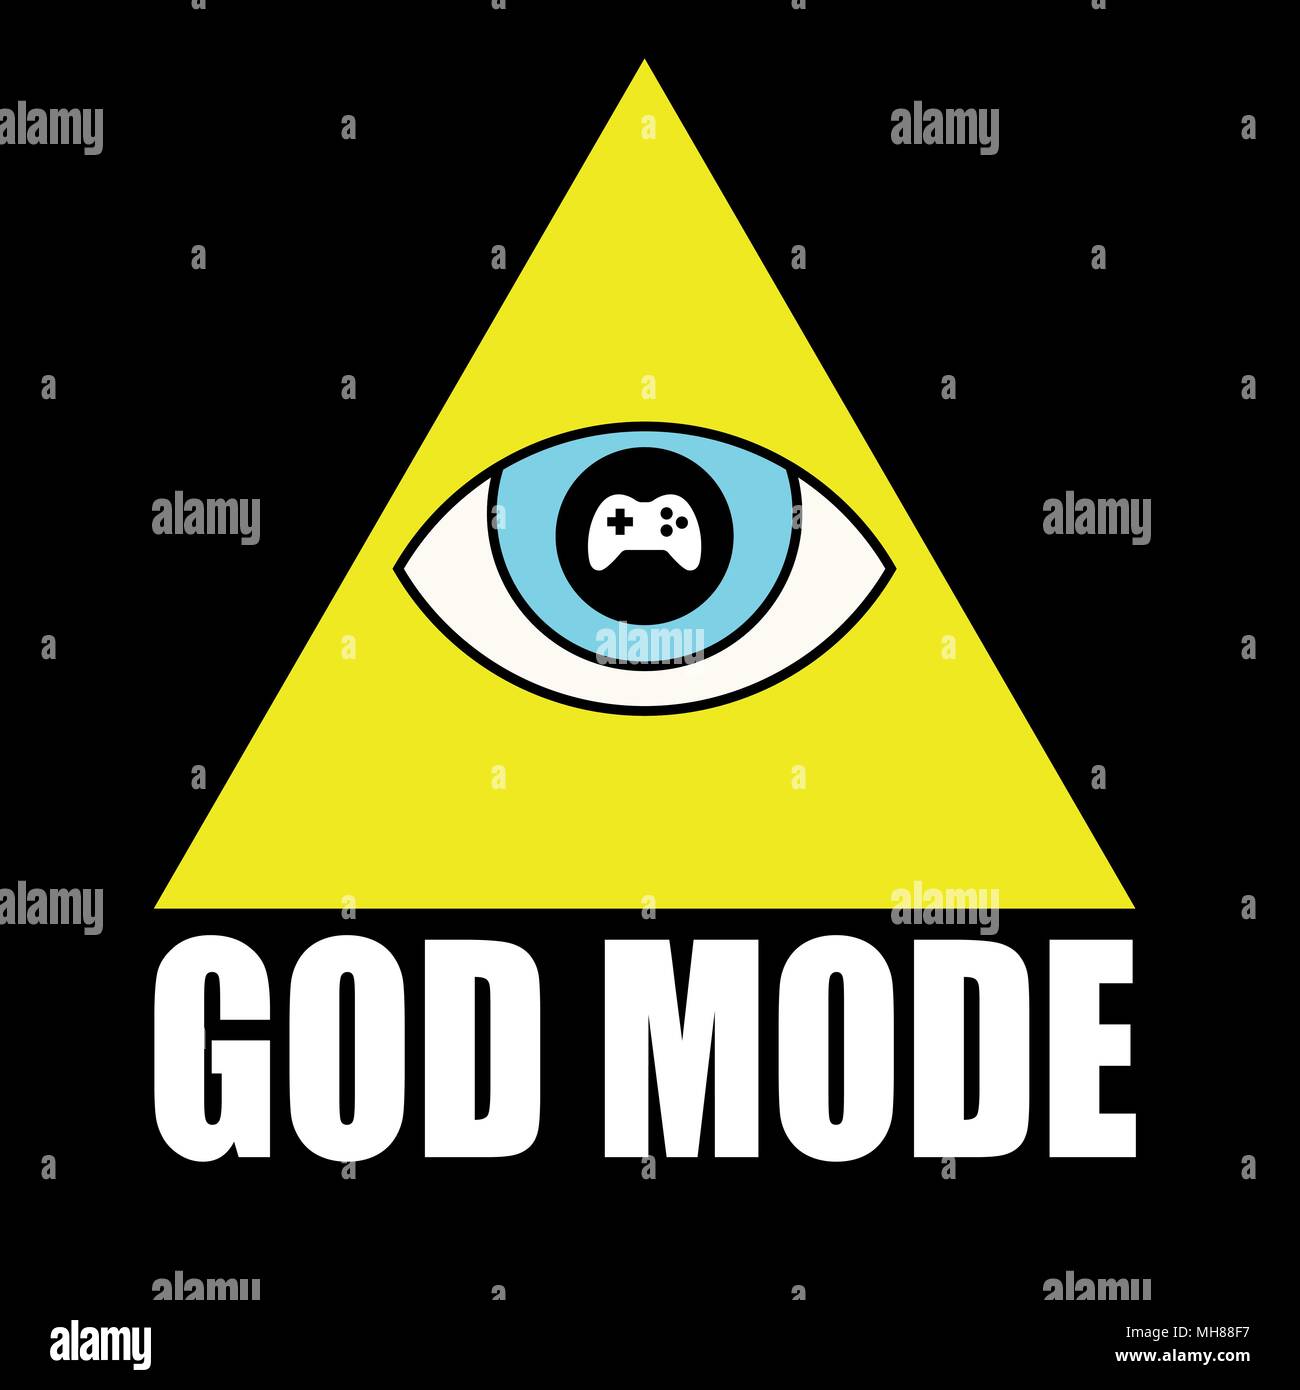 Vector illustration design for T-shirt with pyramid and God mode text. God mode refers to difficulty in videogames. Stock Vector